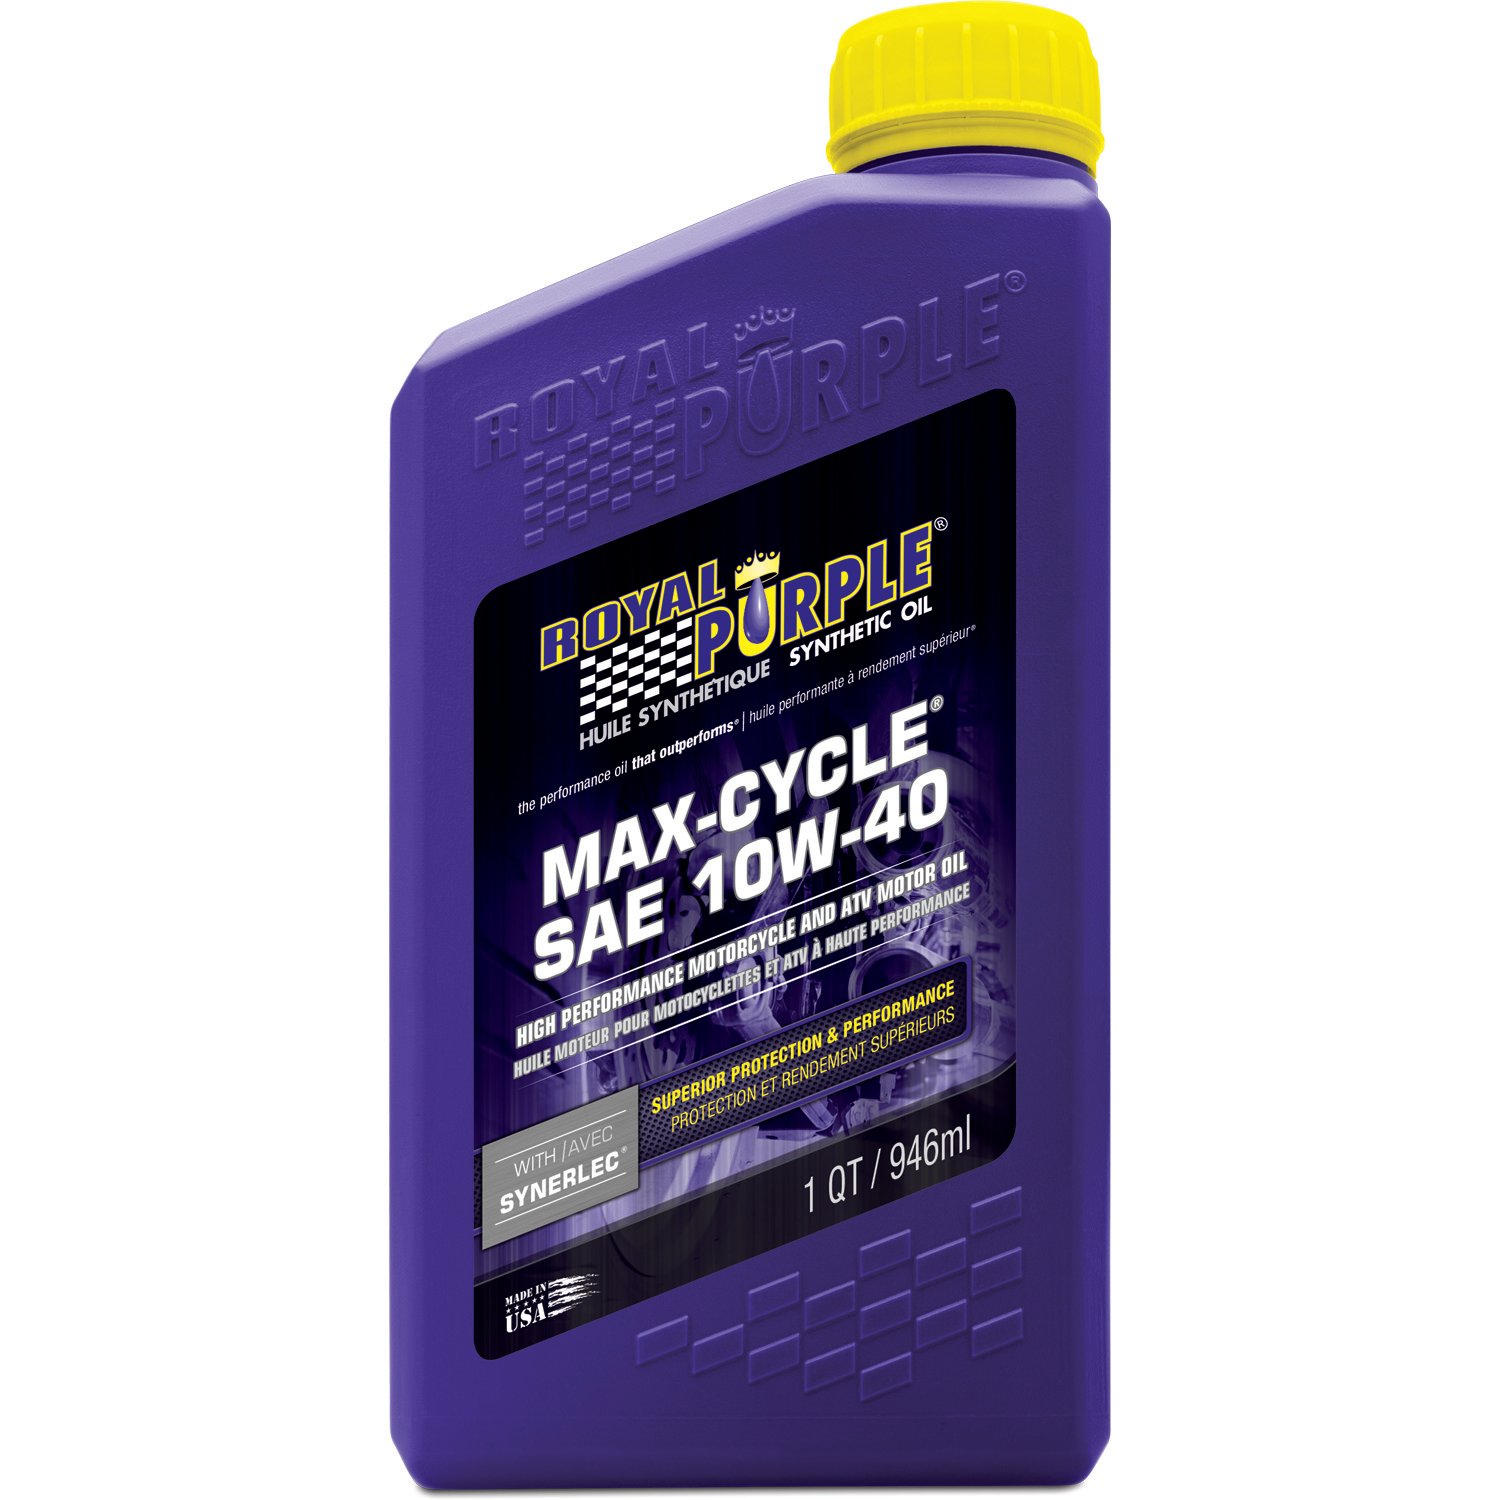 Max-Cycle Synthetic Motorcyle Oil 10W40